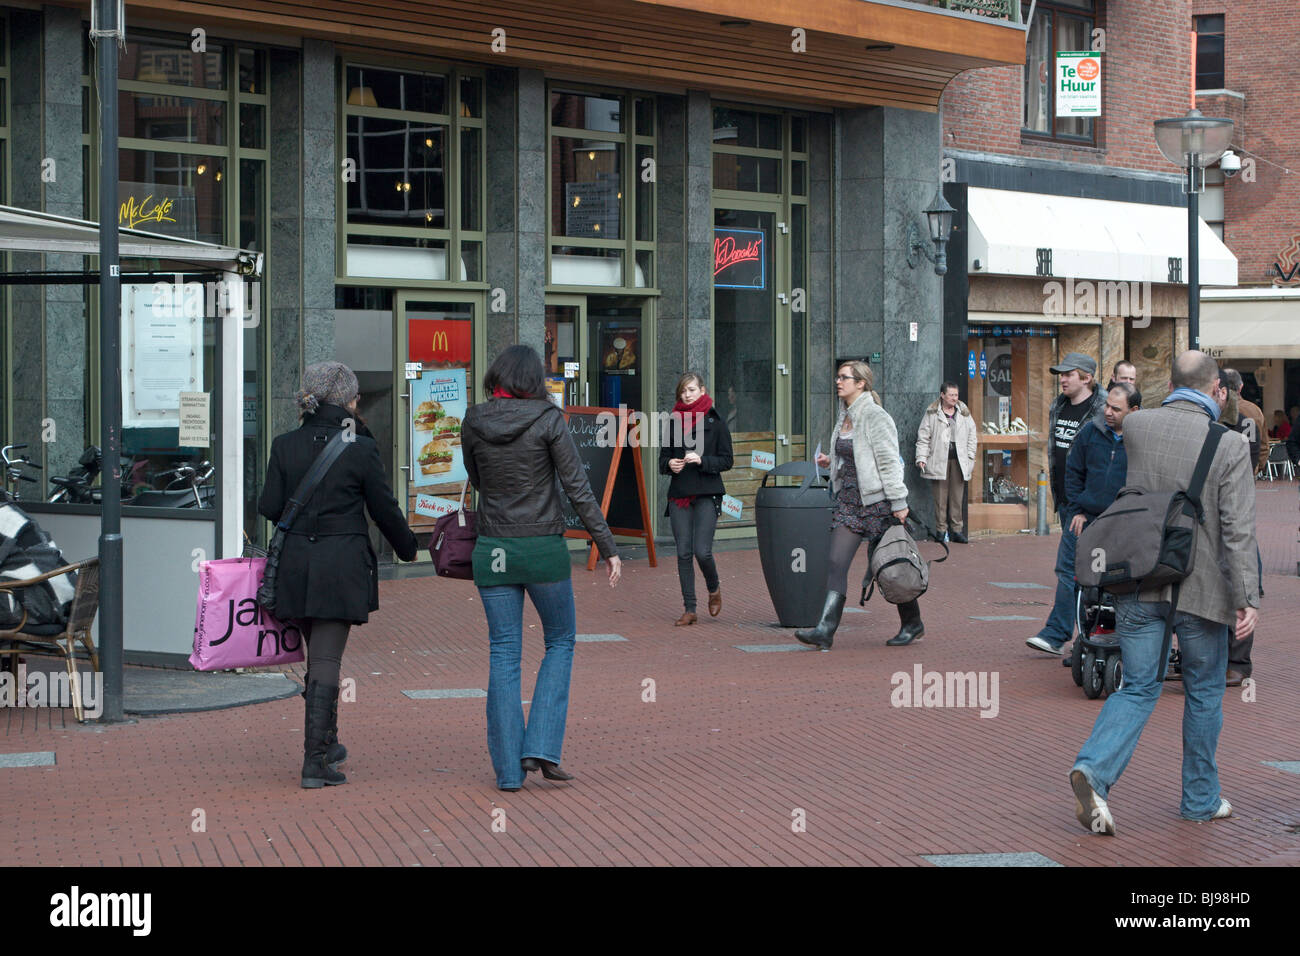 Shoppers walking. Eindhoven, The Netherlands, 20100206 Stock Photo